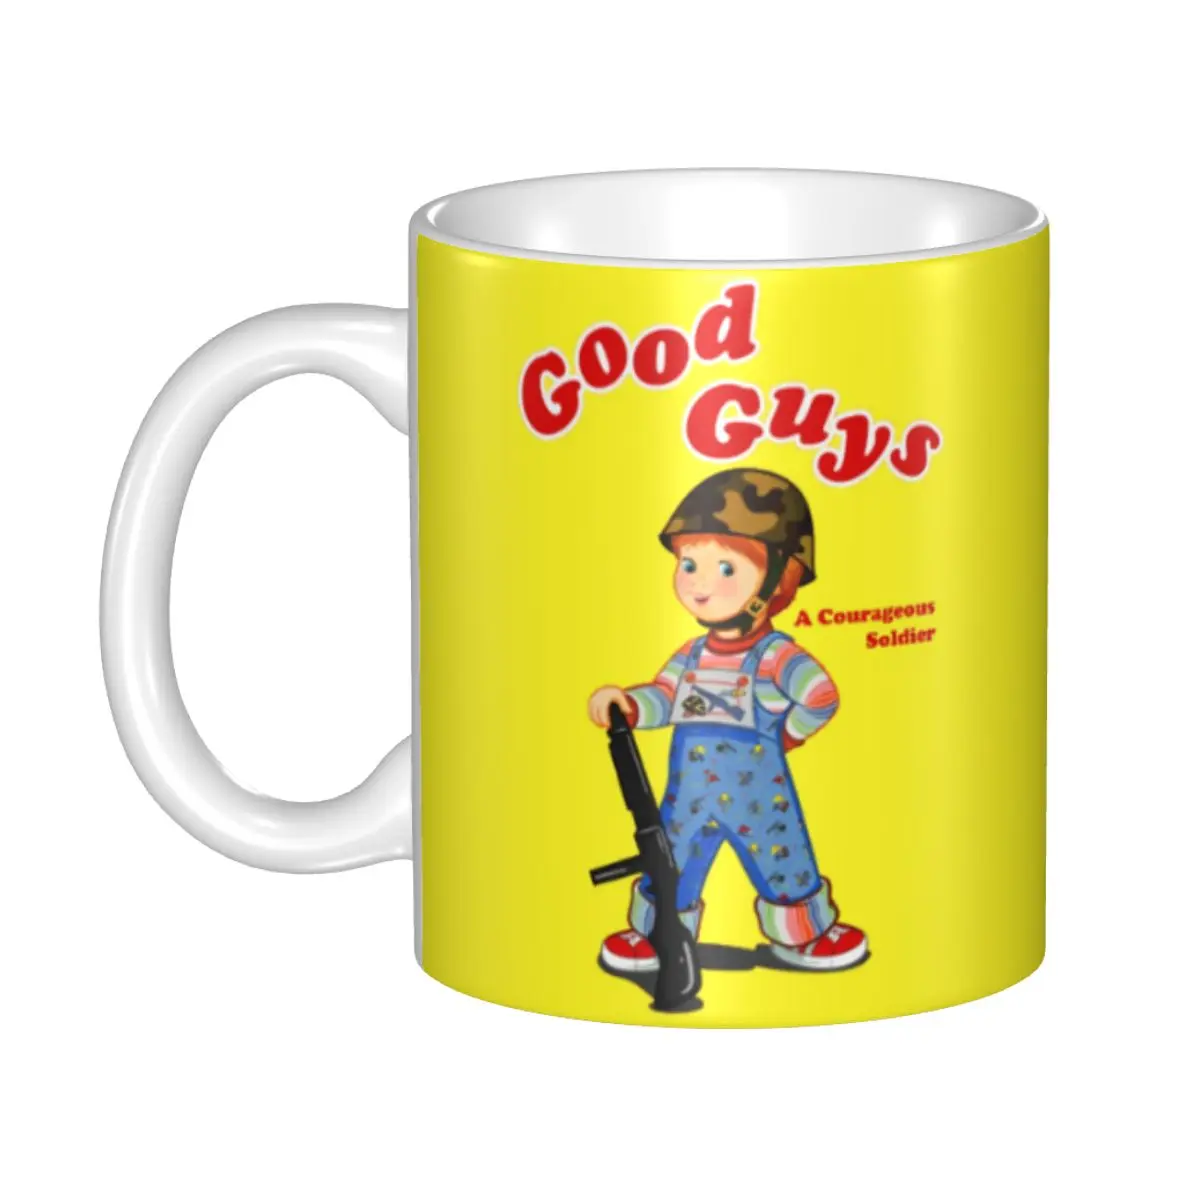 

Personalized Child's Play Chucky Good Guys Soldier Coffee Mugs DIY Ceramic Tea Milk Cups Men Women Outdoor Work Camping Cup